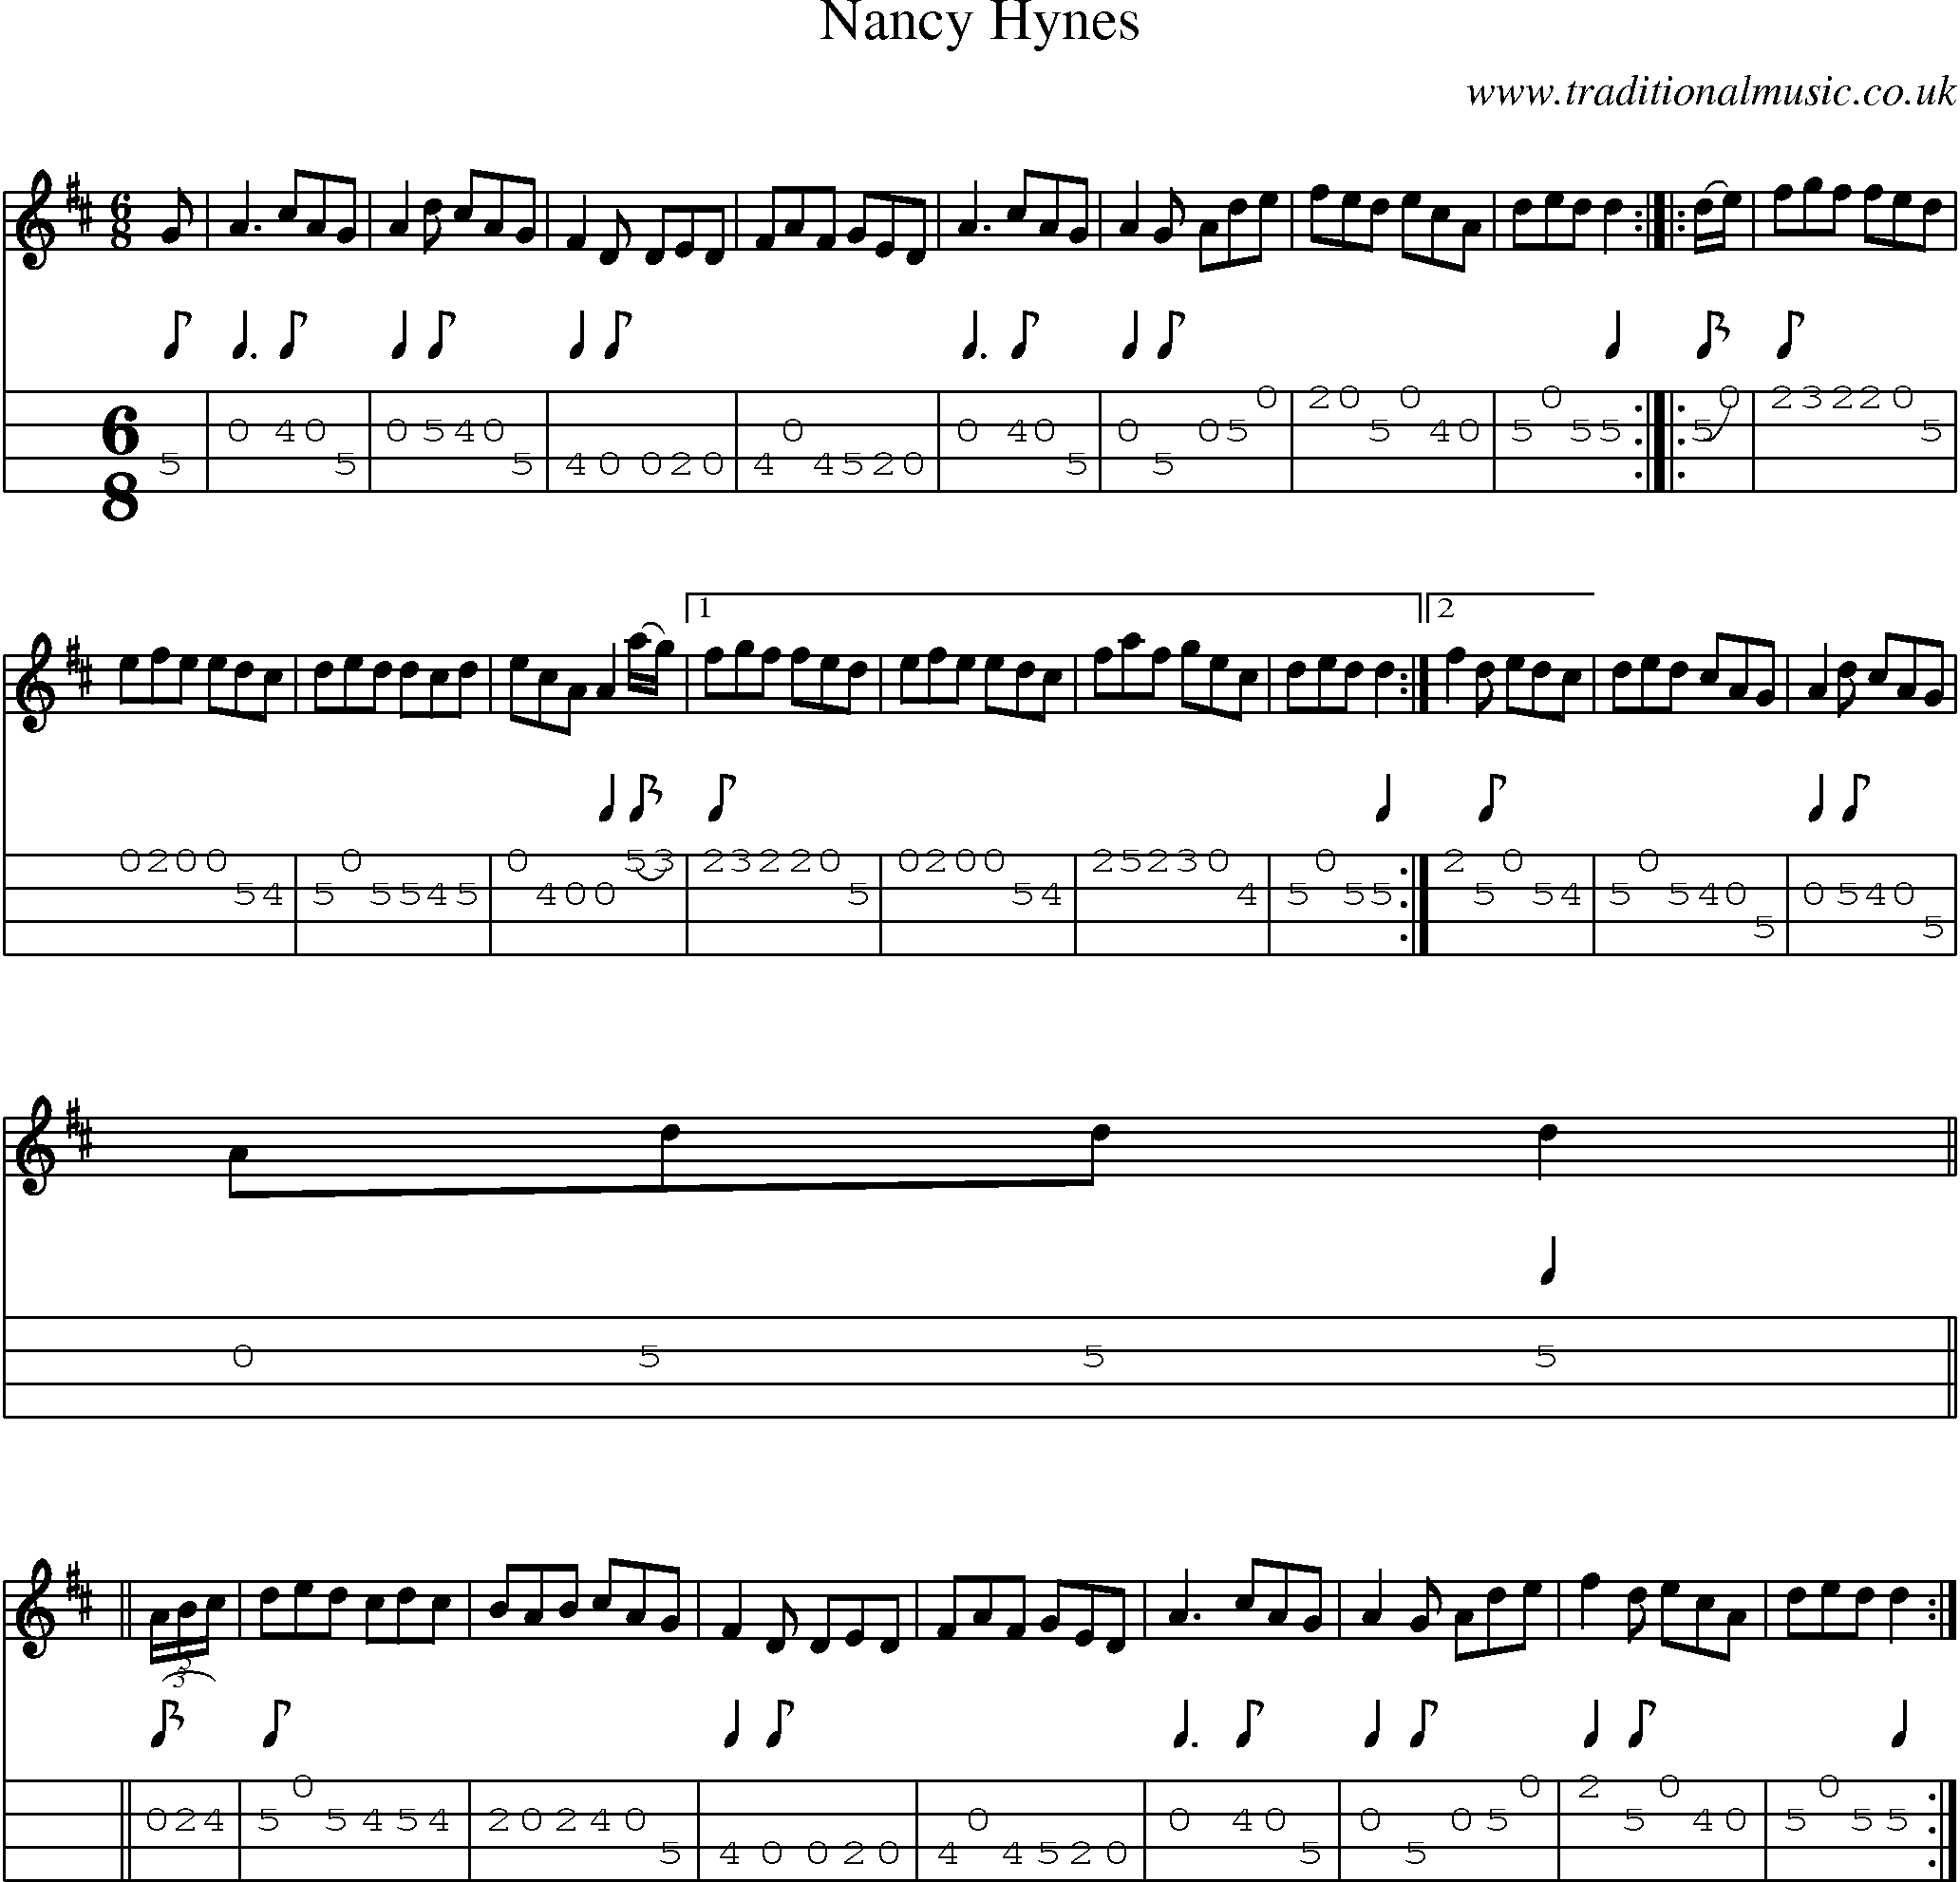 Music Score and Mandolin Tabs for Nancy Hynes